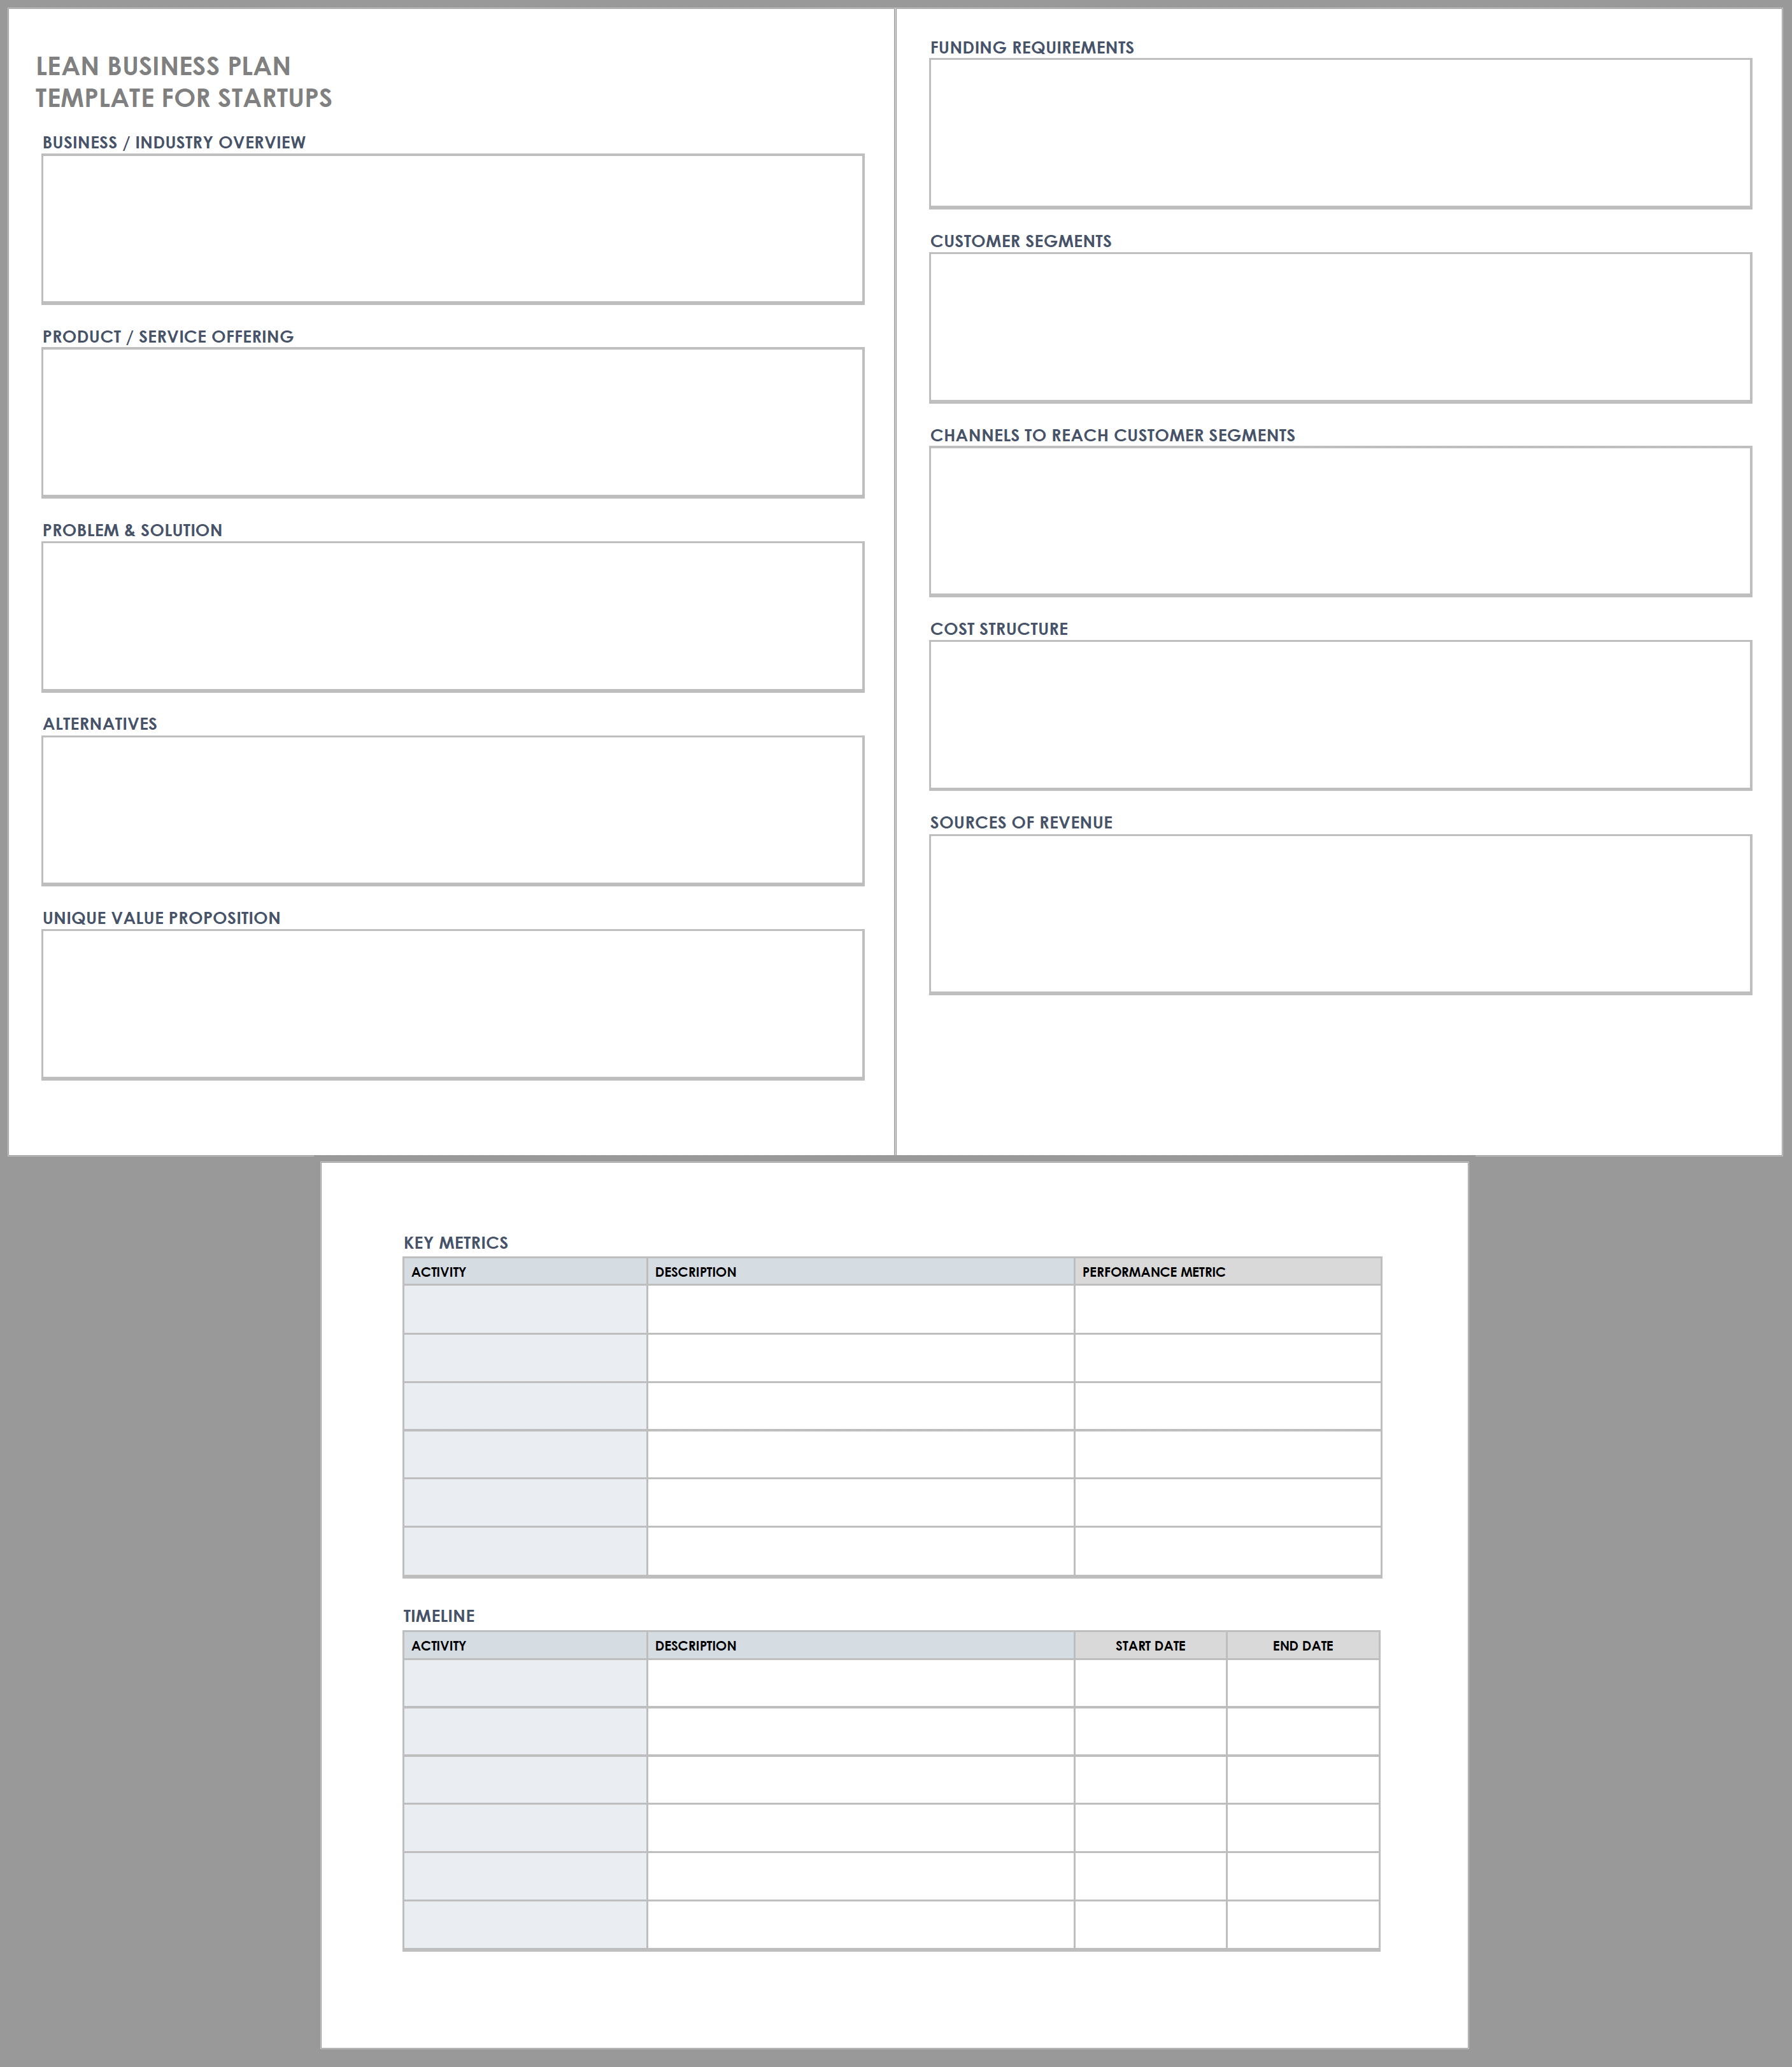 free lean startup business plan template